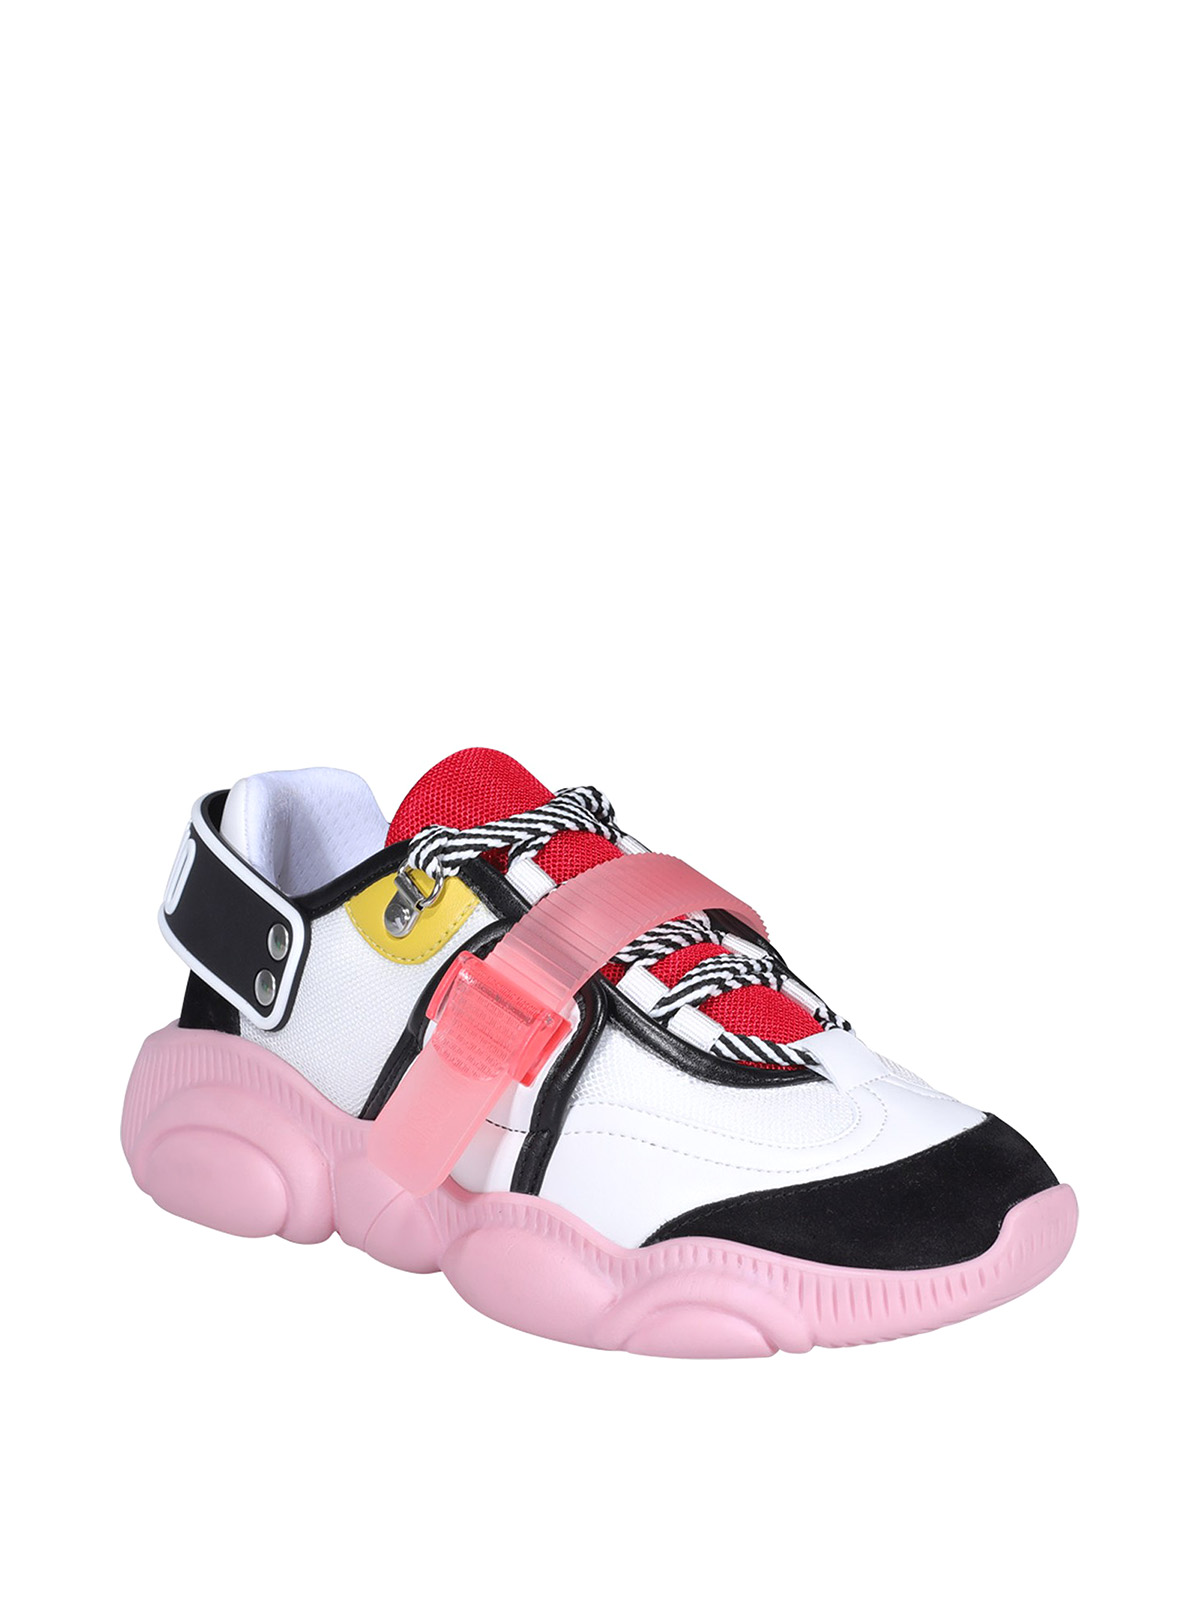 Trainers Moschino - Leather and fabric sneakers - MA15133G1DMP110A